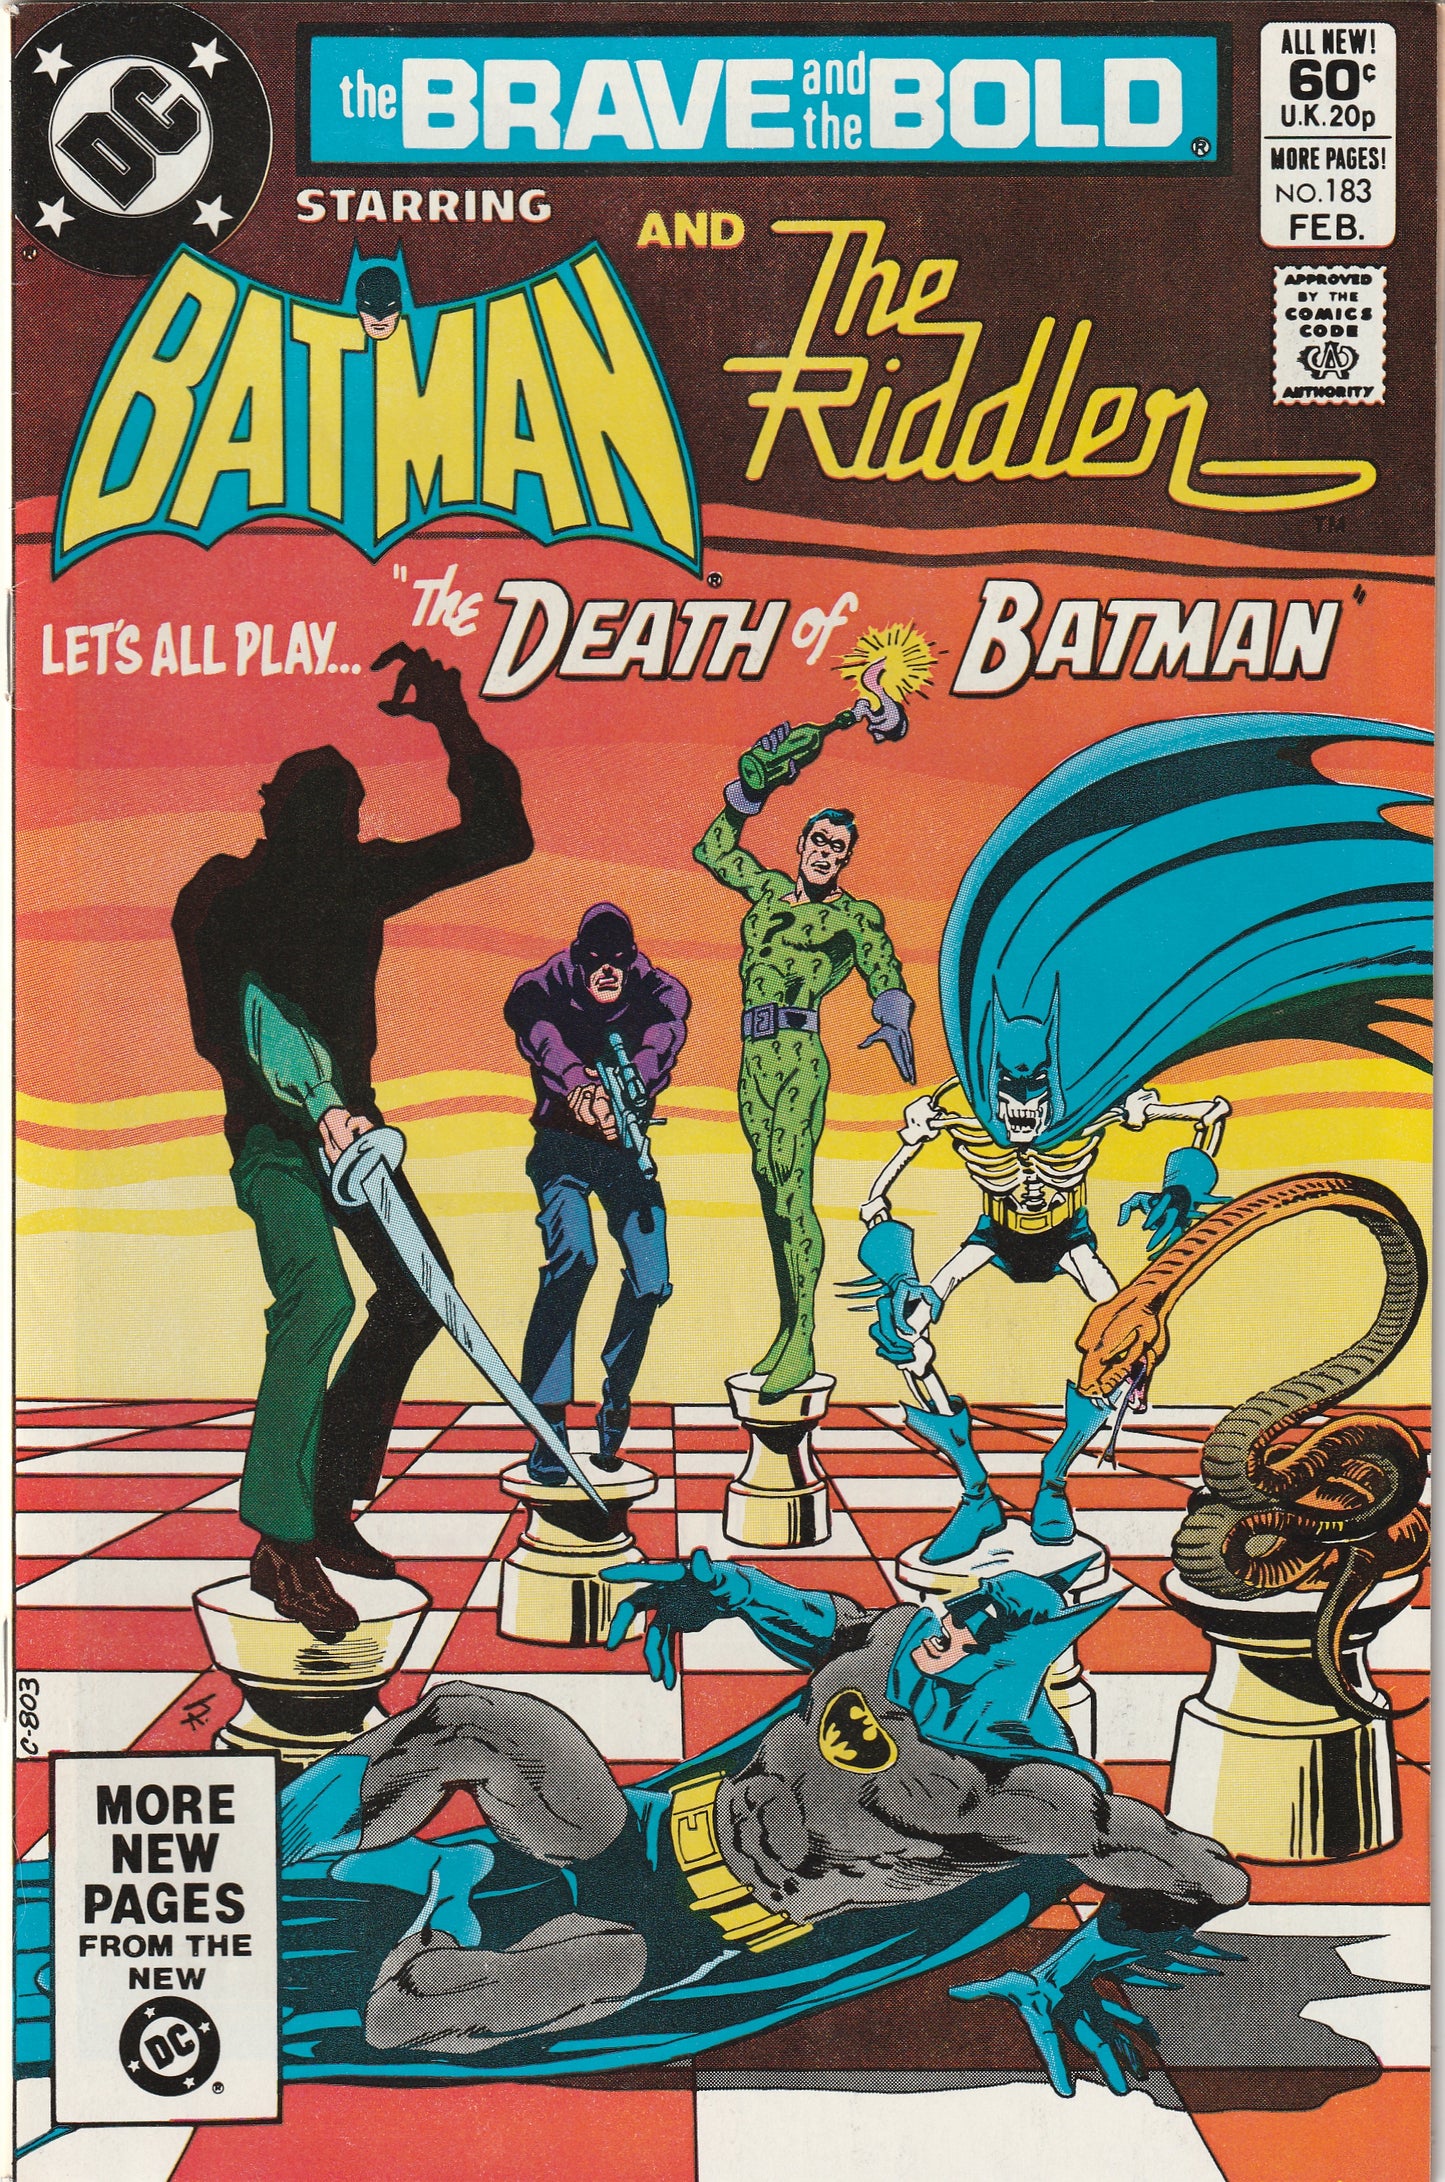 Brave and the Bold #183 (1982) - Batman & The Riddler